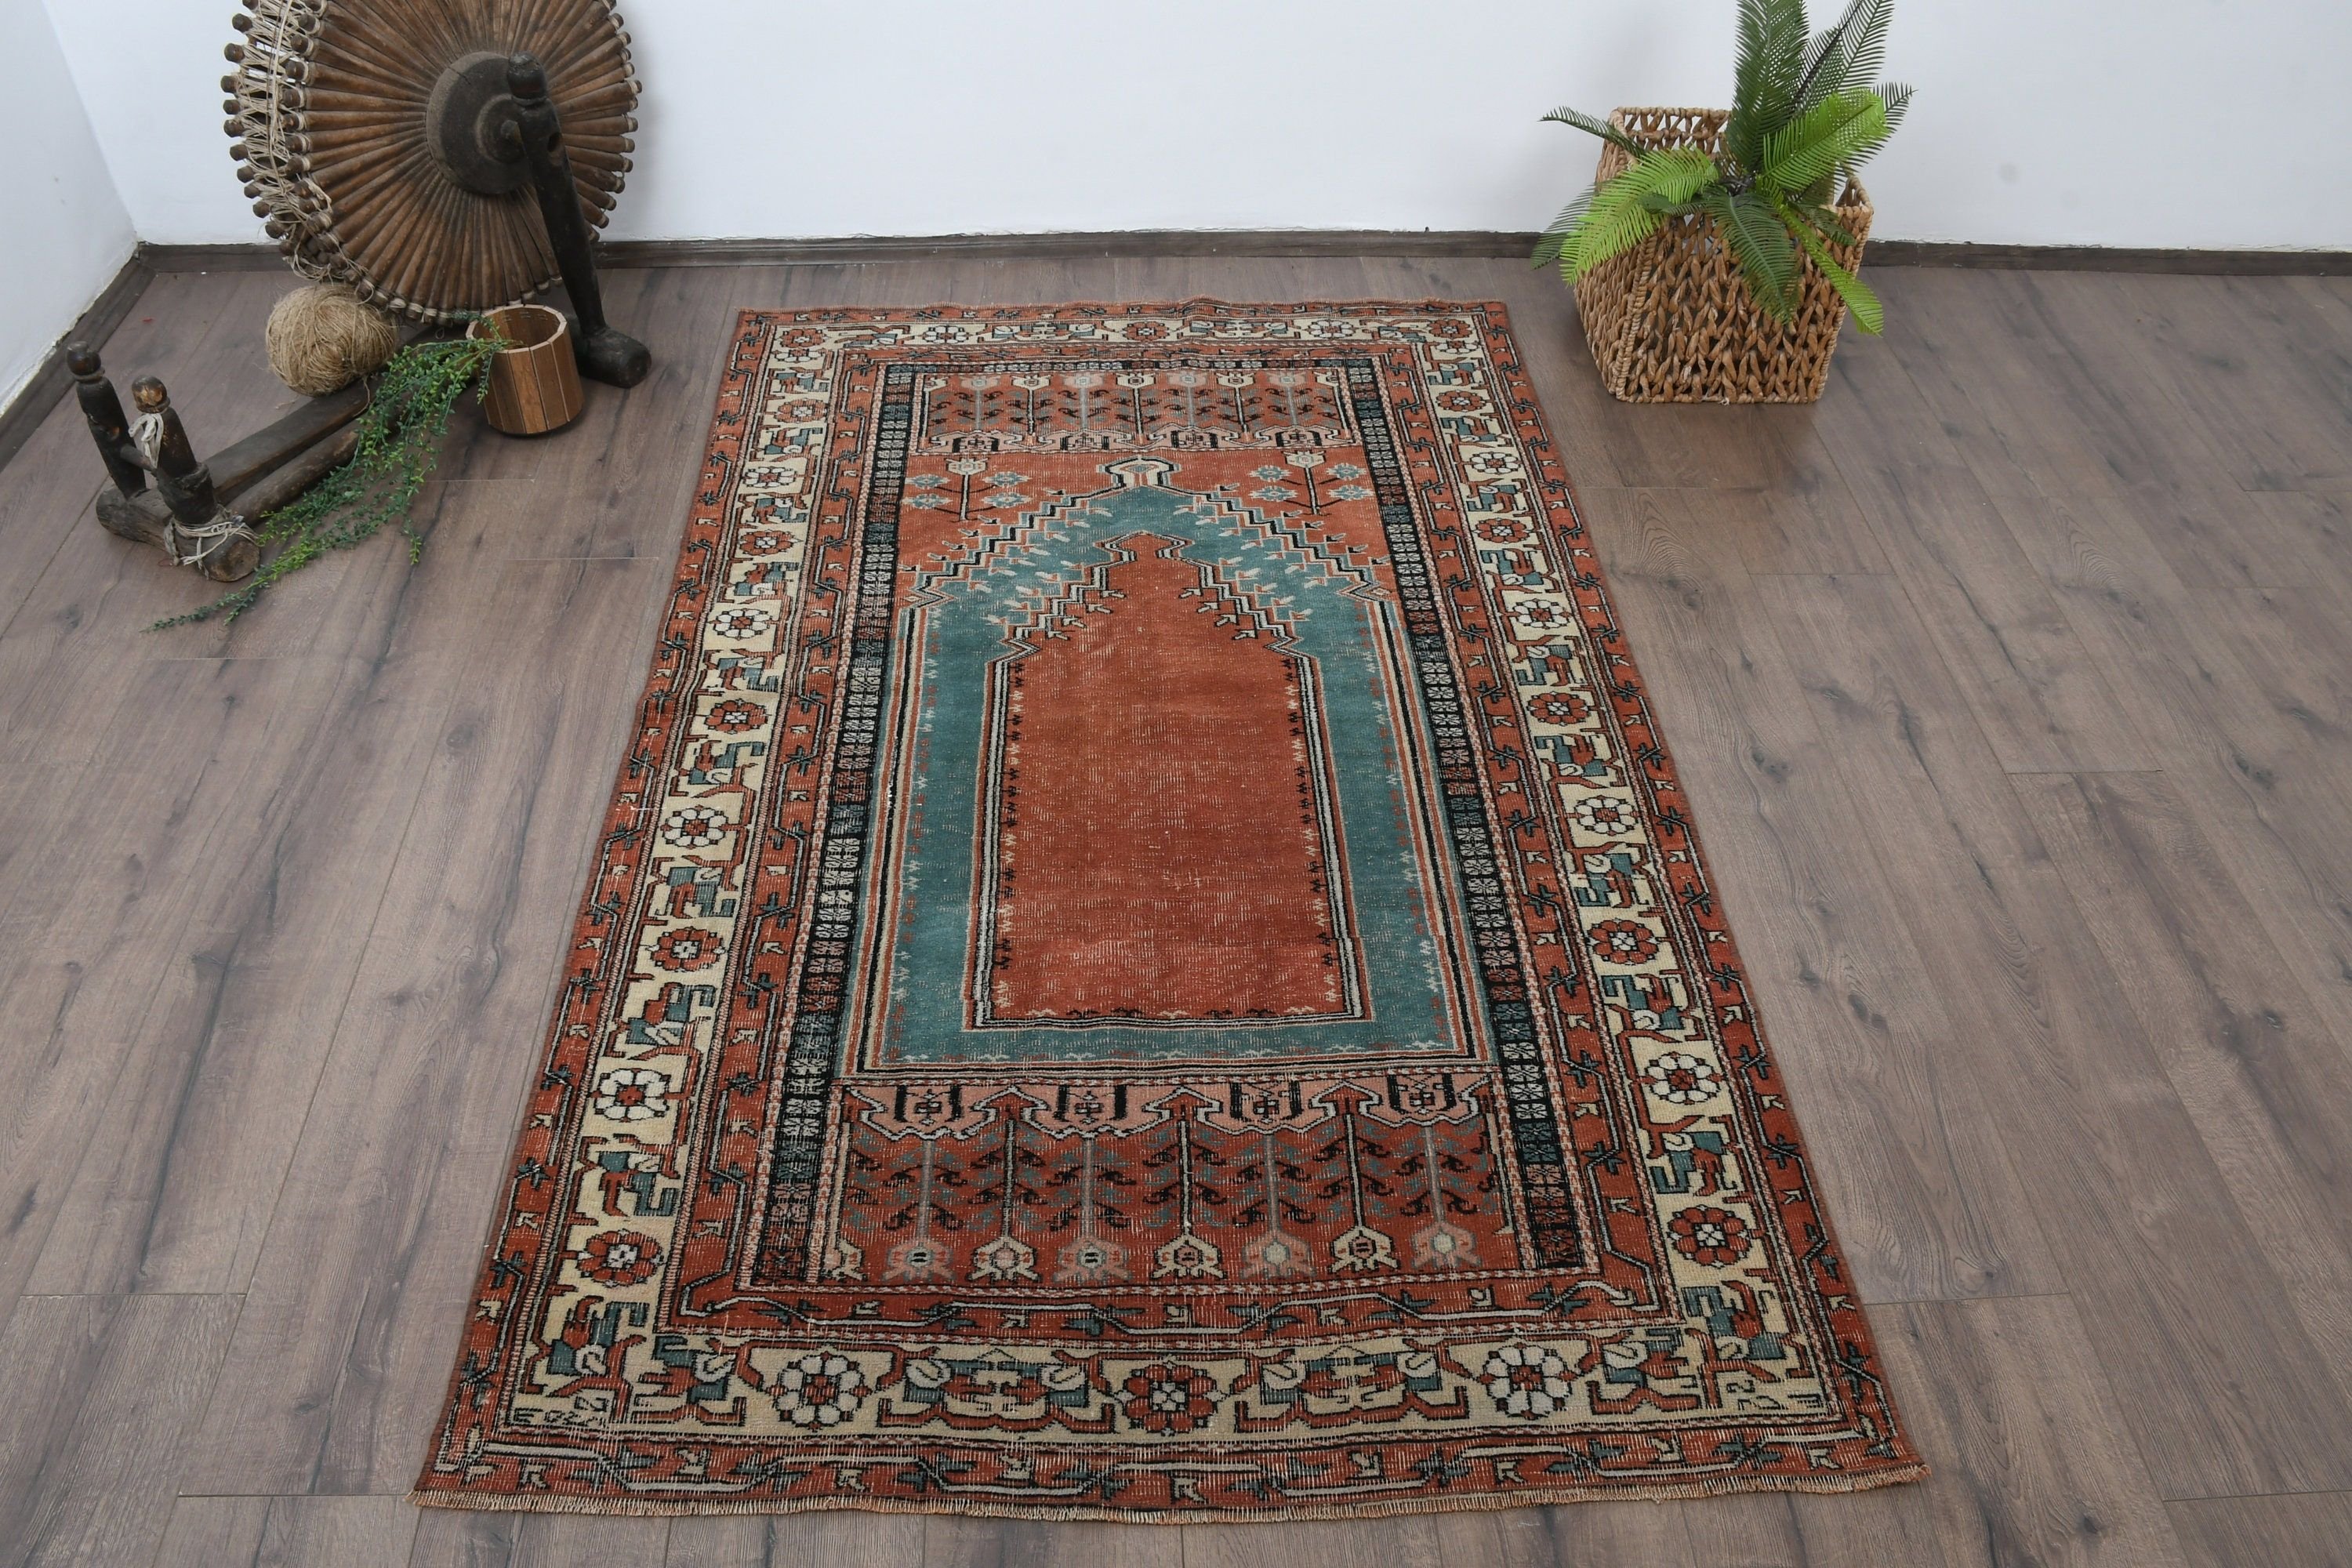 Rugs for Entry, Cute Rug, Kitchen Rug, Cool Rugs, Gray Floor Rugs, Vintage Rug, Entry Rug, Turkish Rug, 3.7x6 ft Accent Rug